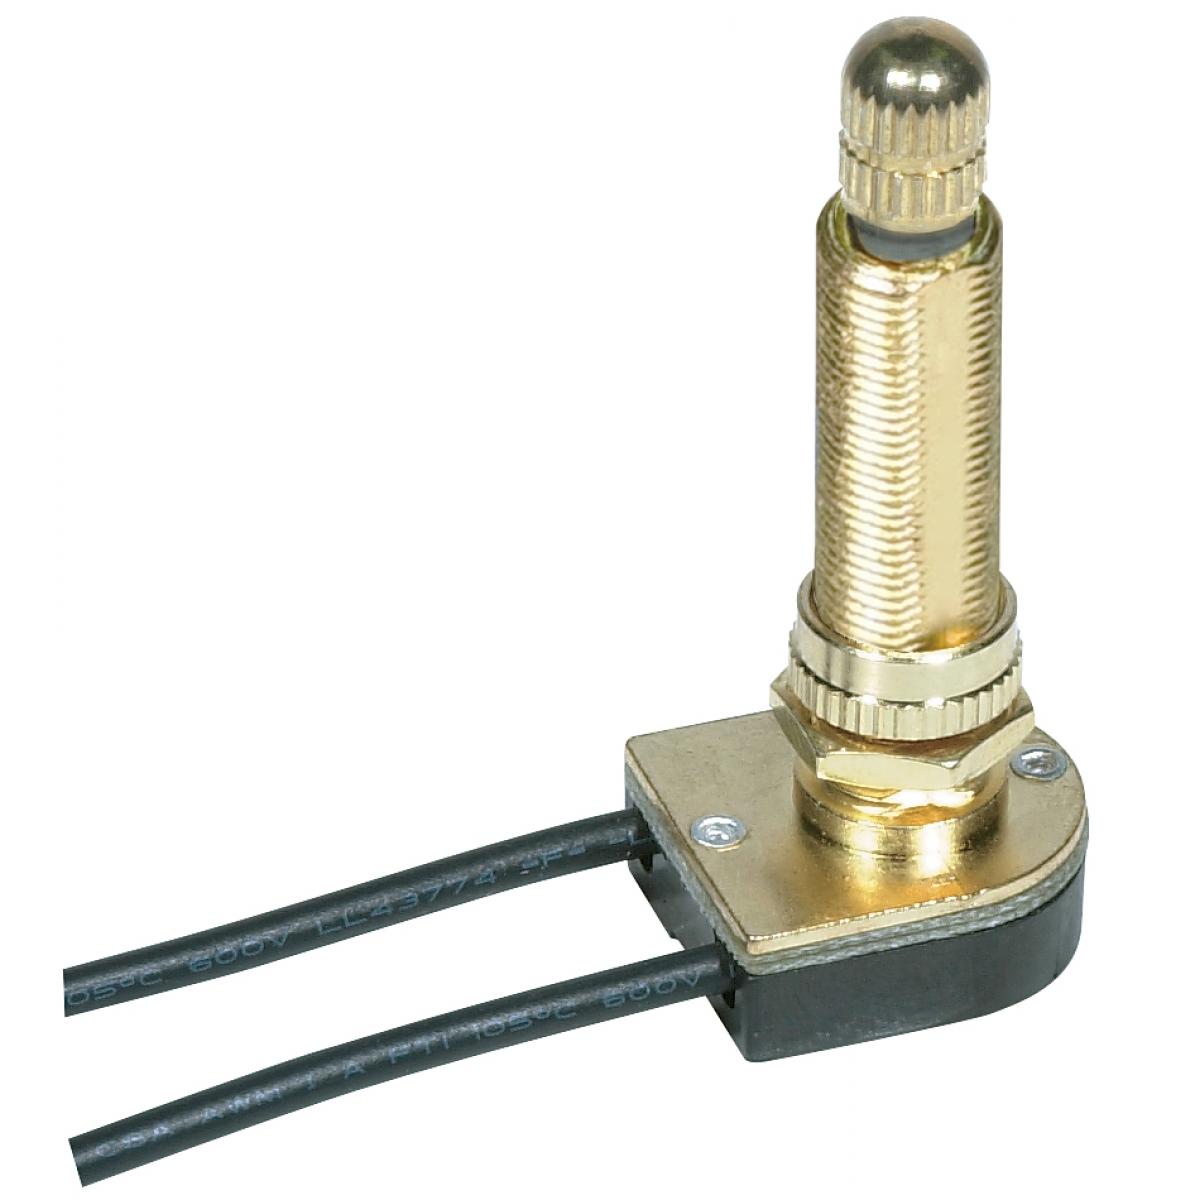 Satco 80-1413 On-Off Metal Rotary Switch 1-1/2" Metal Bushing Single Circuit 6A-125V, 3A-250V Rating 6" Leads Brass Finish